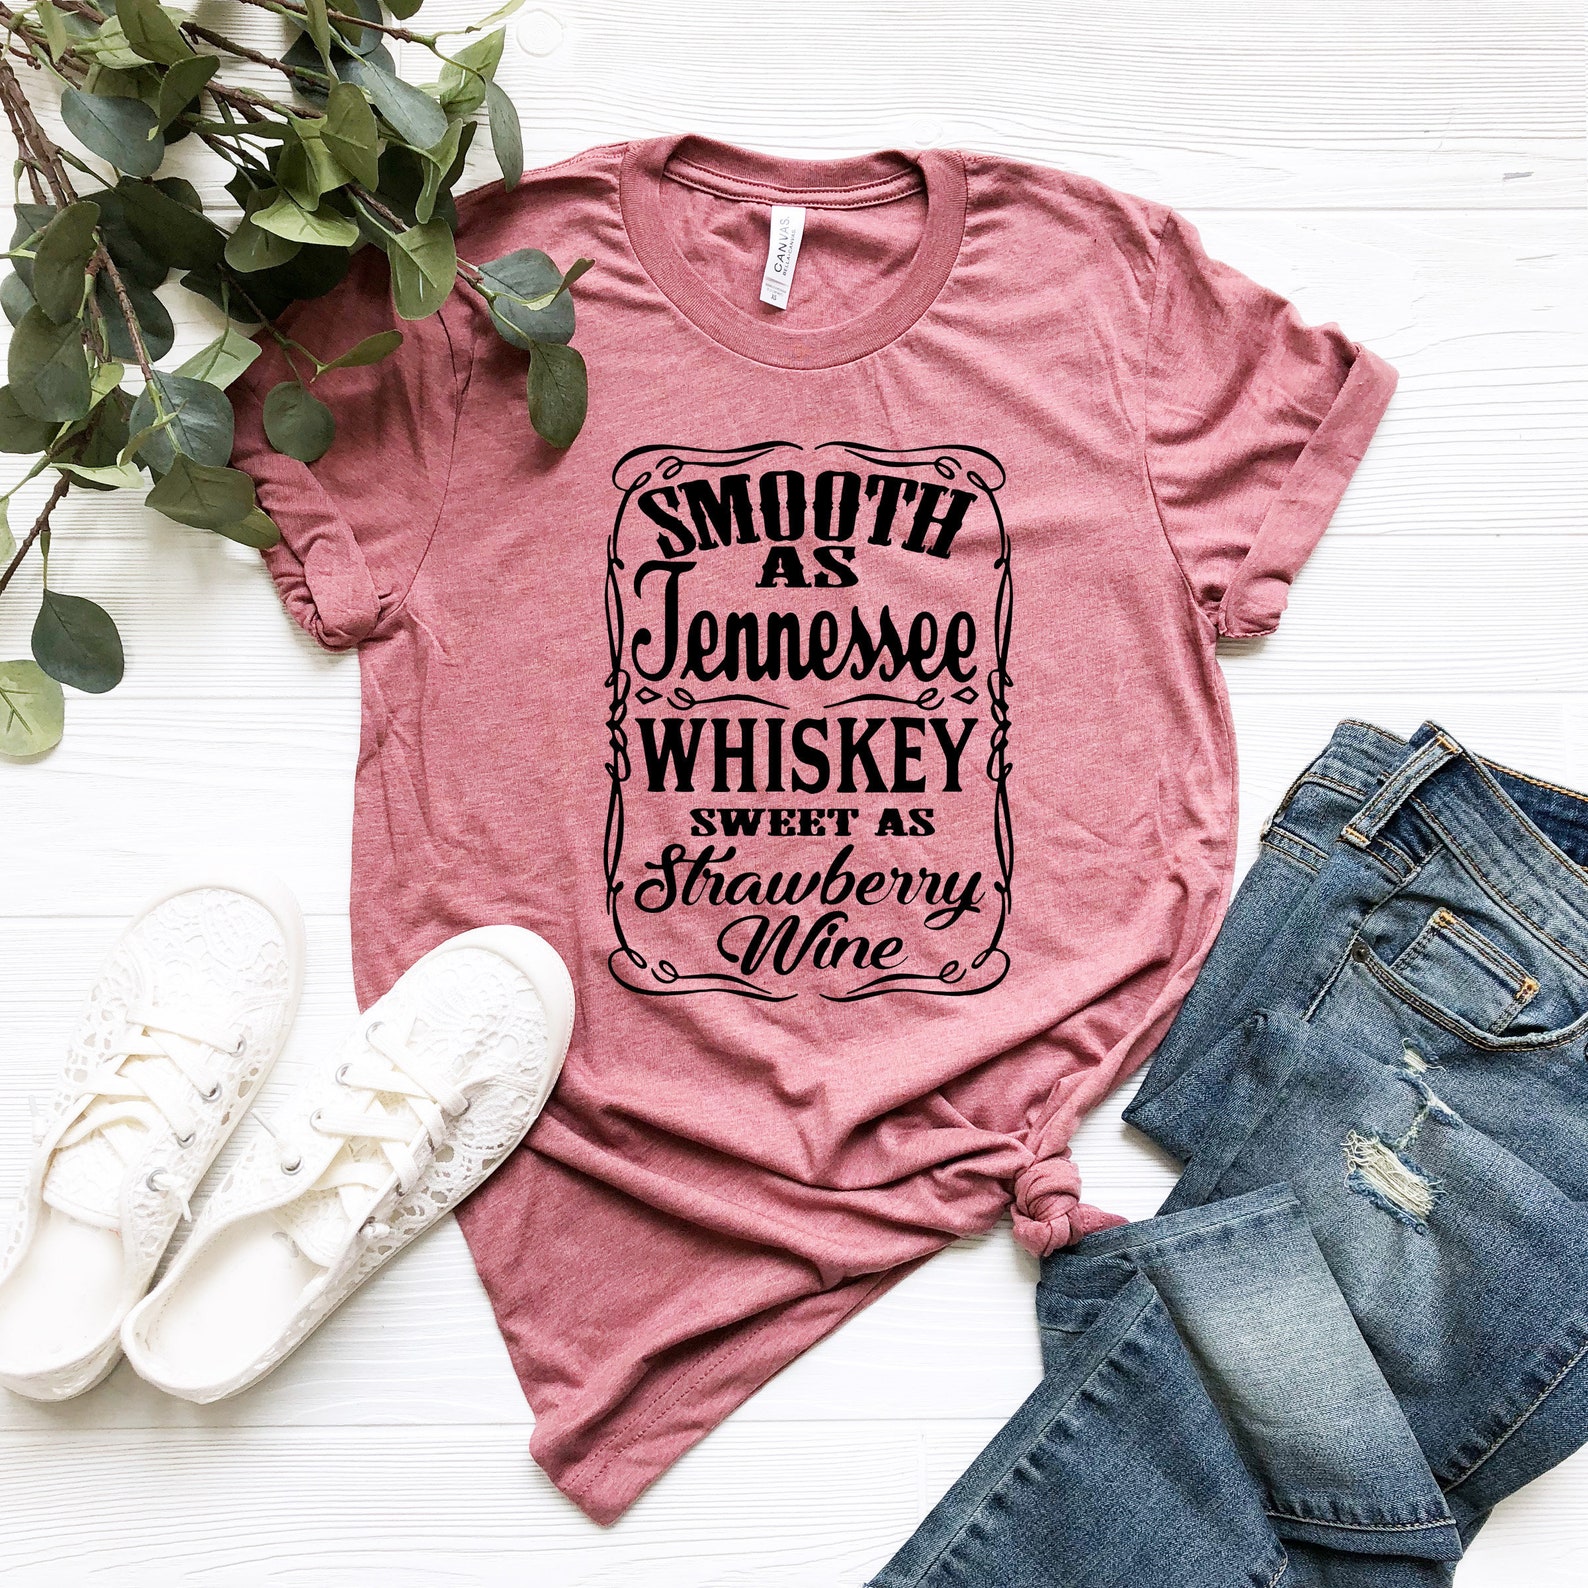 Smooth As Tennessee Whiskey Sweet As Strawberry Wine Shirt | Etsy